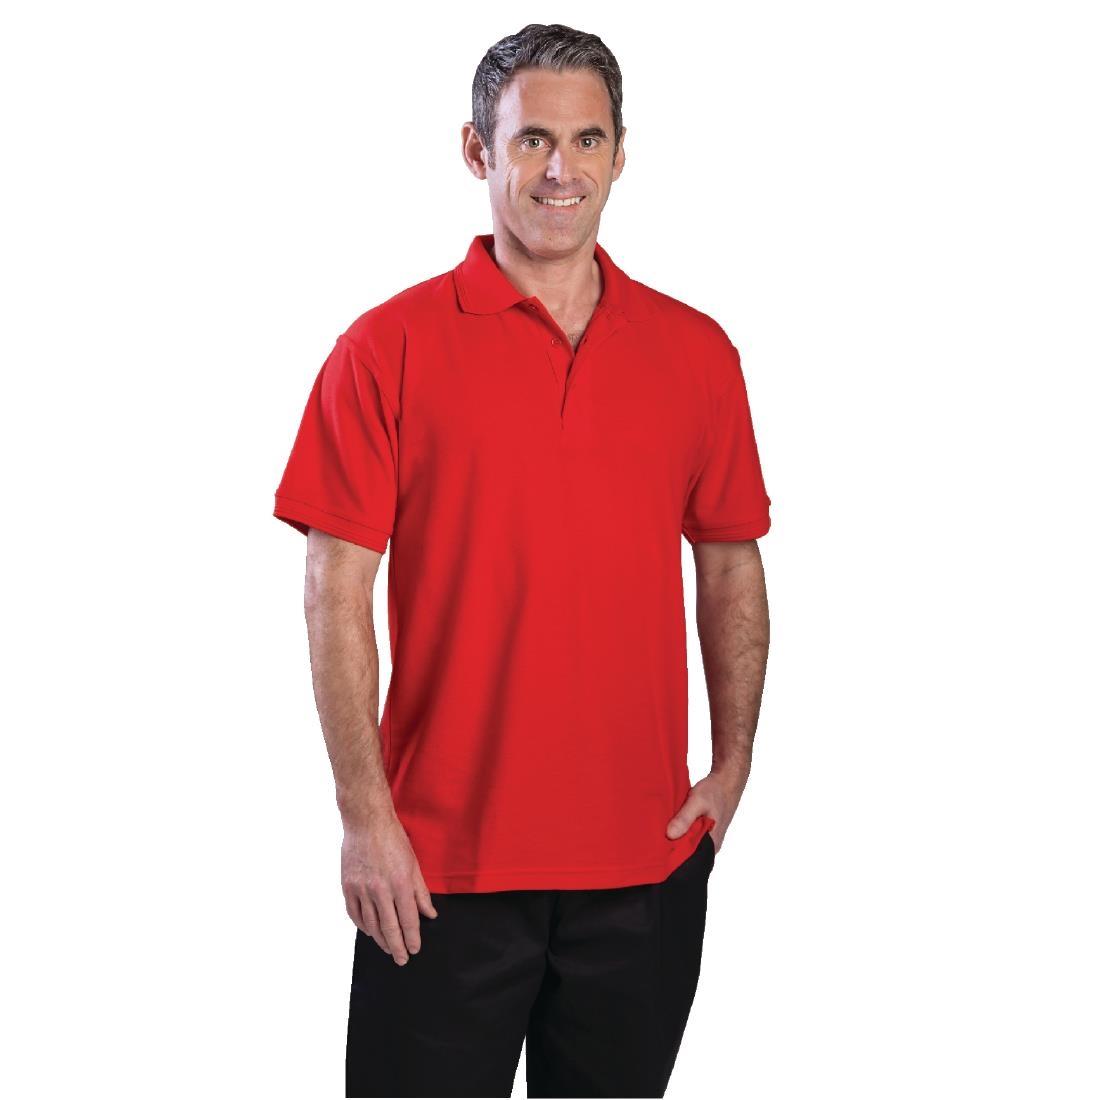 Unisex Polo Shirt Red L - A762-L  - 1